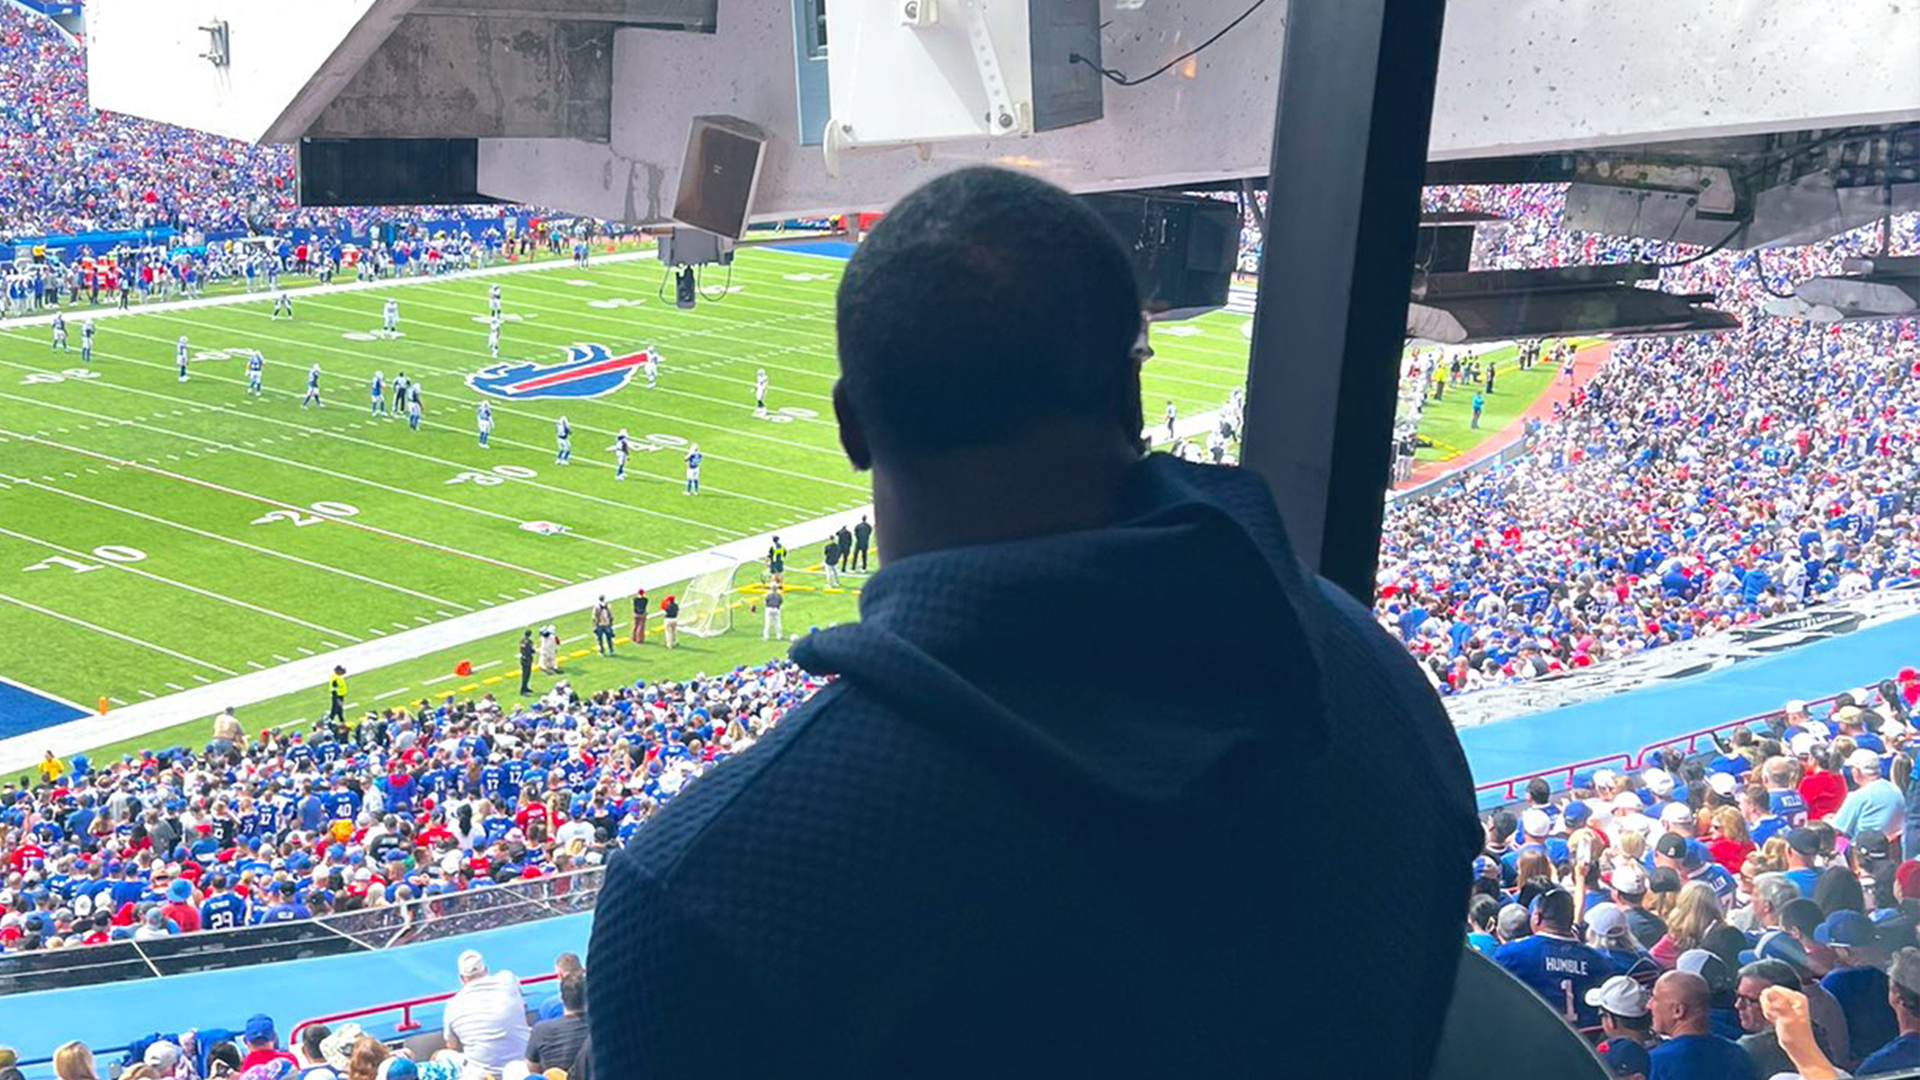 Buffalo Bills legend slams NFL team for horrendous view of stadium for Las Vegas Raiders game ‘like being in timeout’